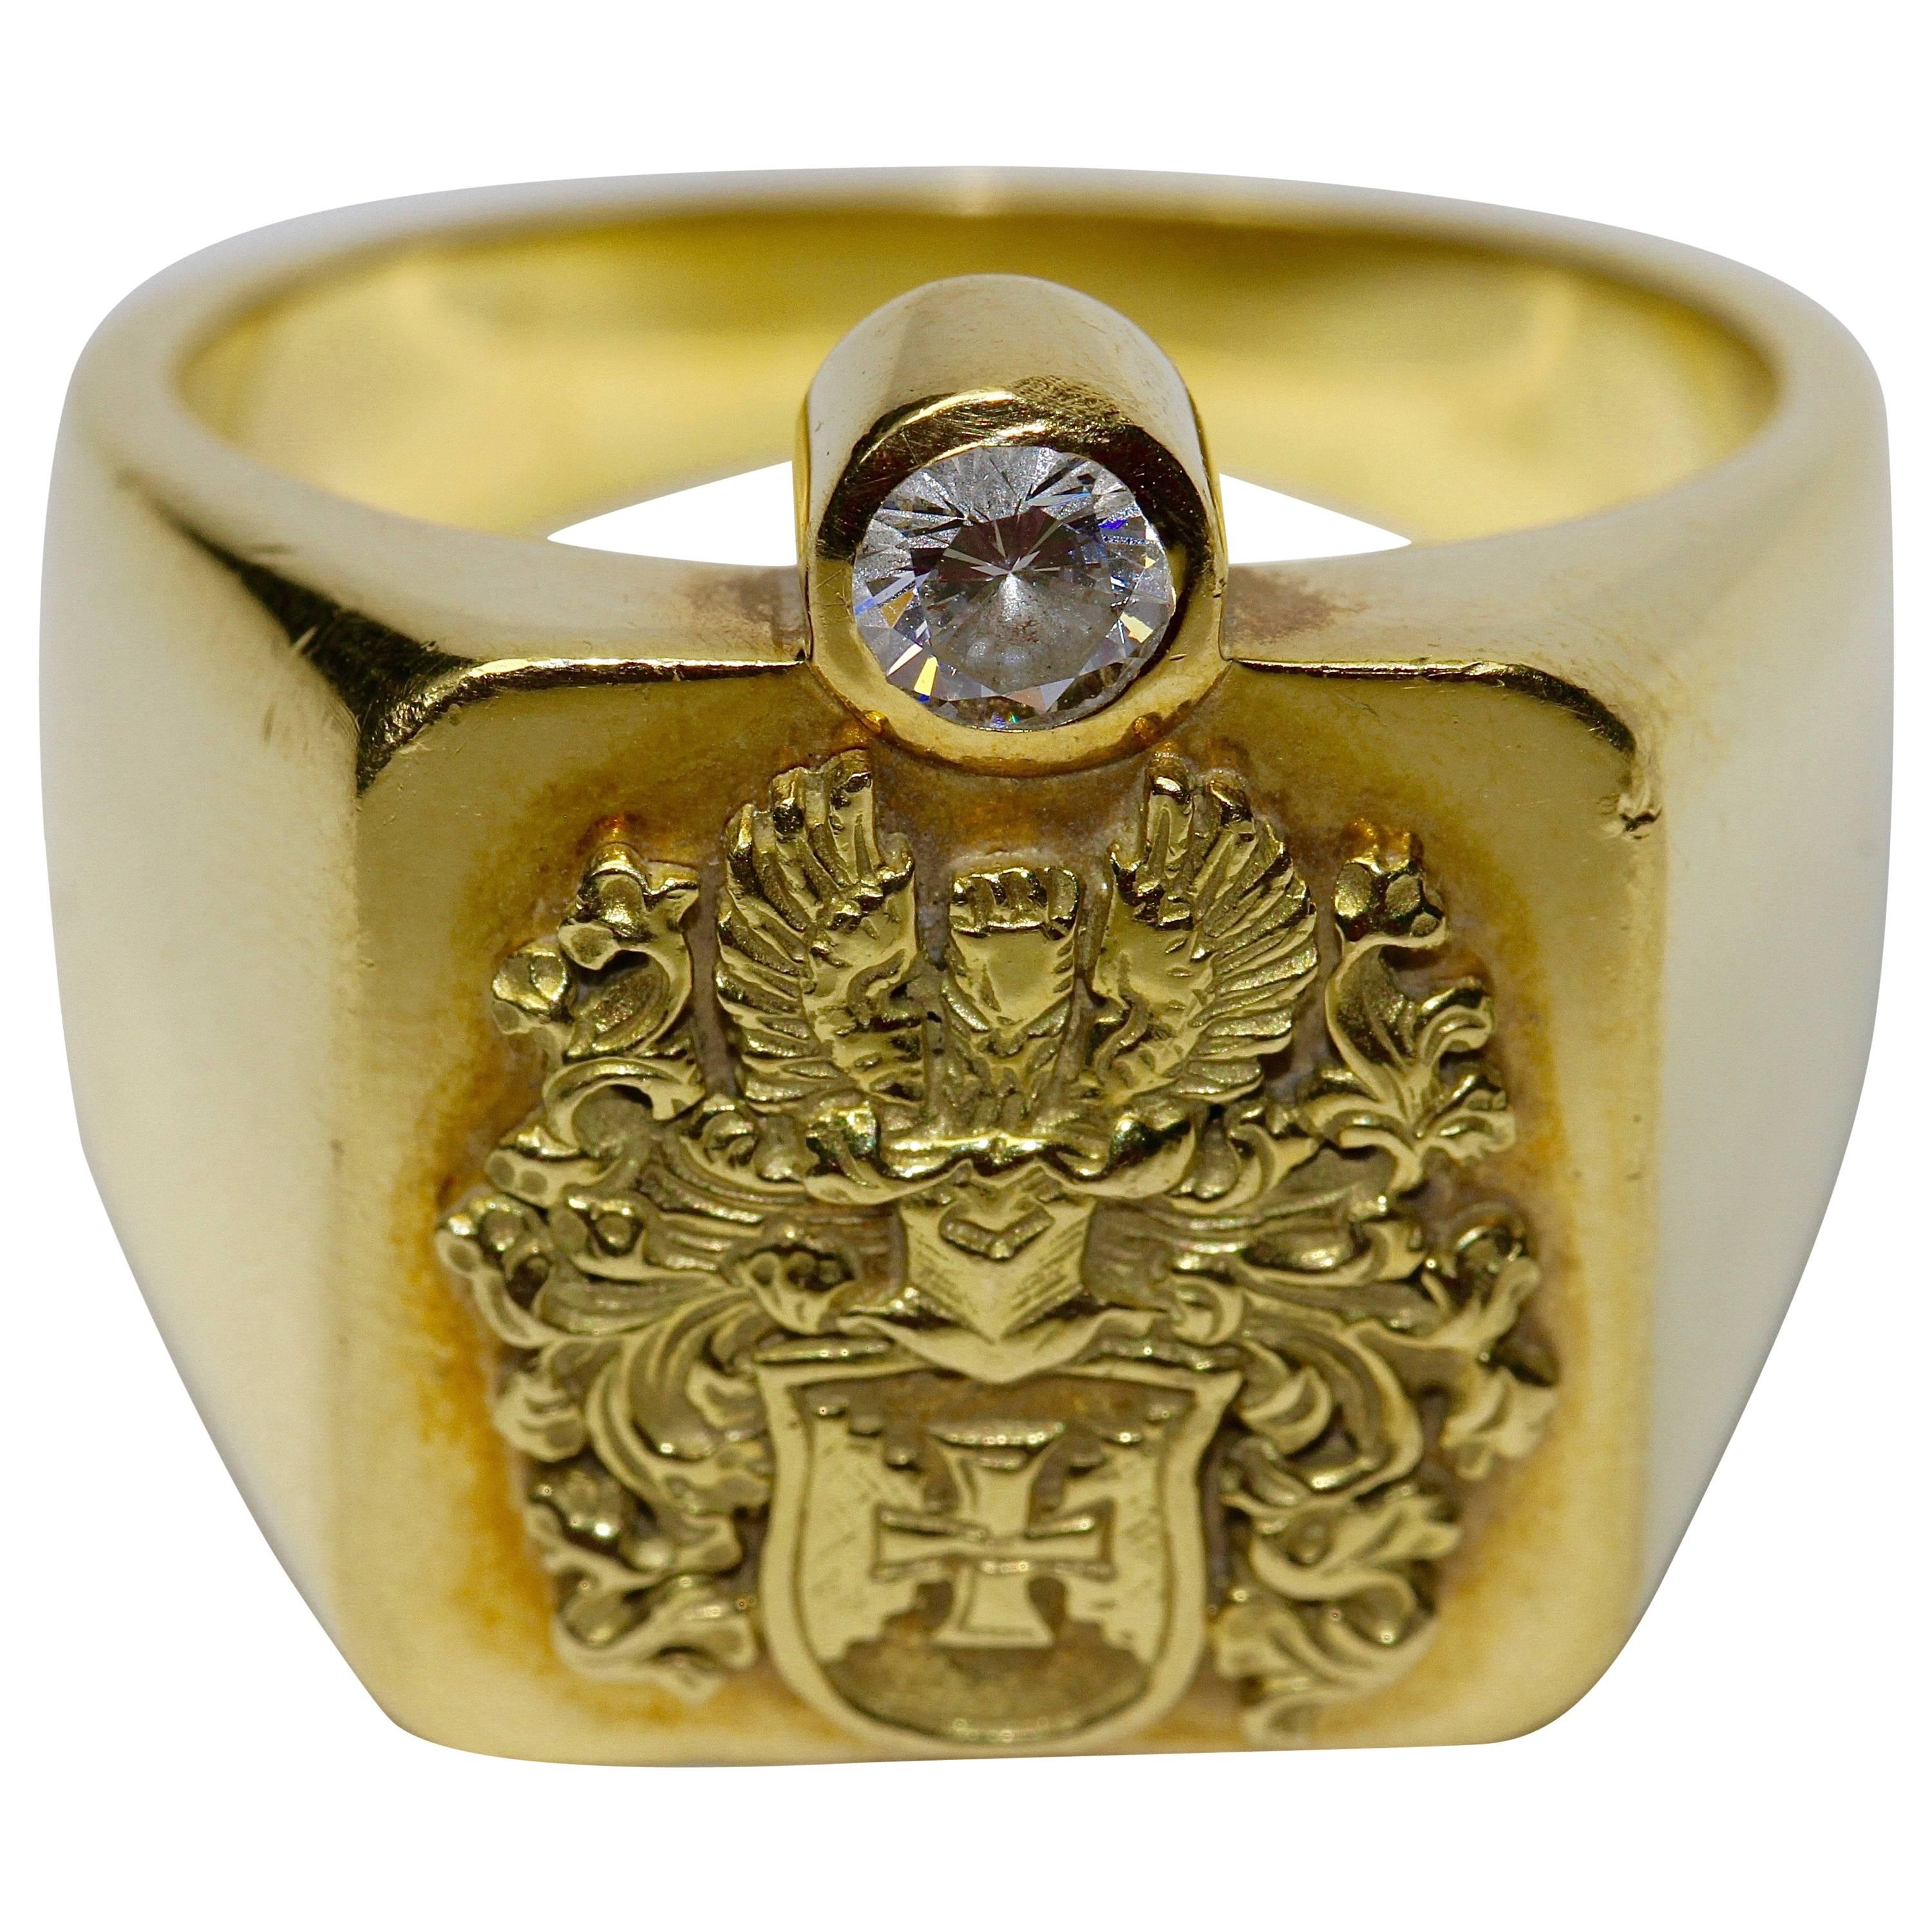 18k Solid Gold Men’s Signet Ring with Diamond Solitaire, Noble Coat of Arms